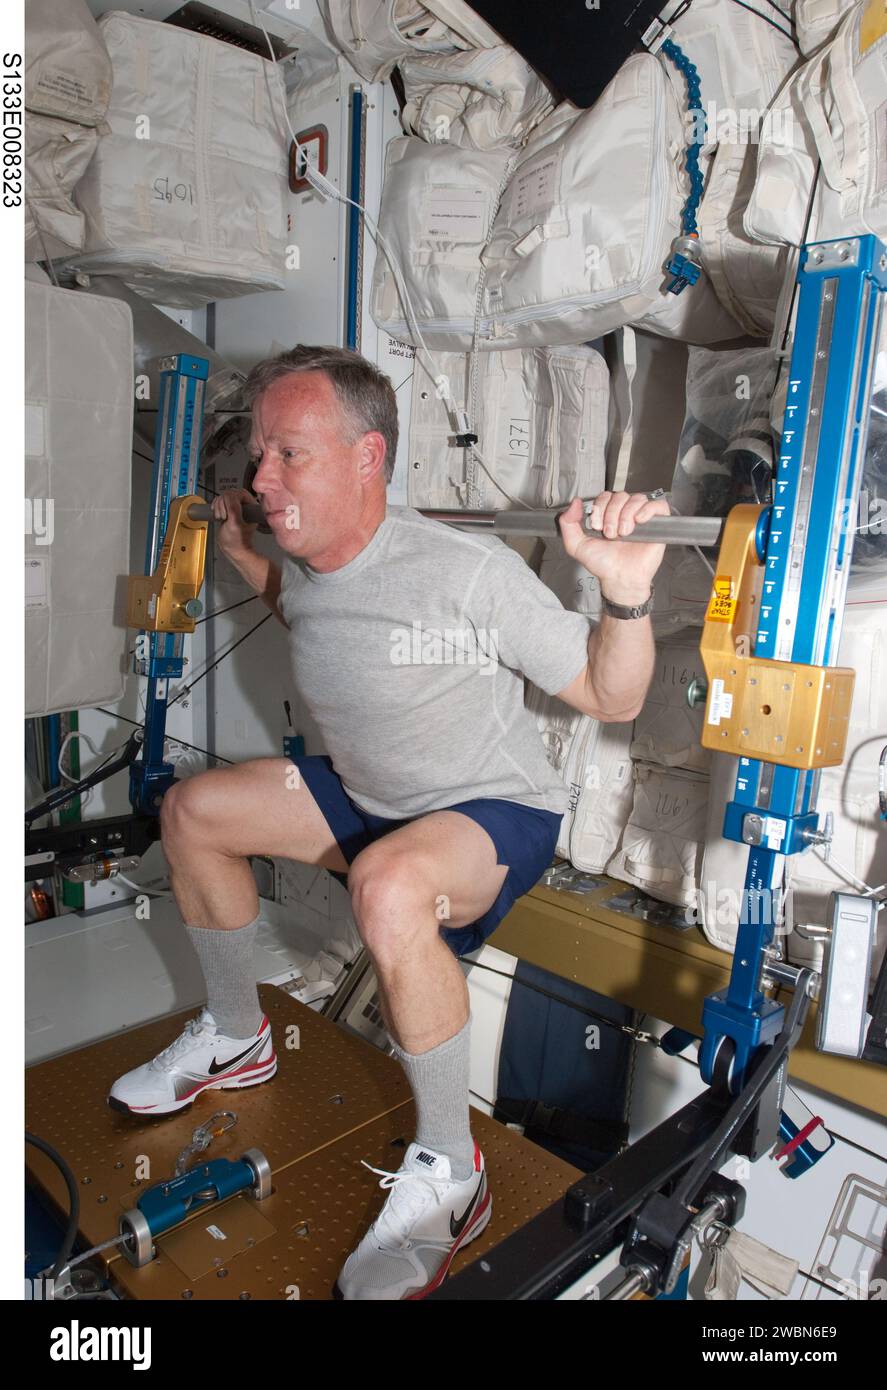 S133-E-008323 (3 March 2011) --- NASA astronaut Steve Lindsey, STS-133 commander, exercises using the advanced Resistive Exercise Device (aRED) in the Tranquility node of the International Space Station while space shuttle Discovery remains docked with the station. Stock Photo